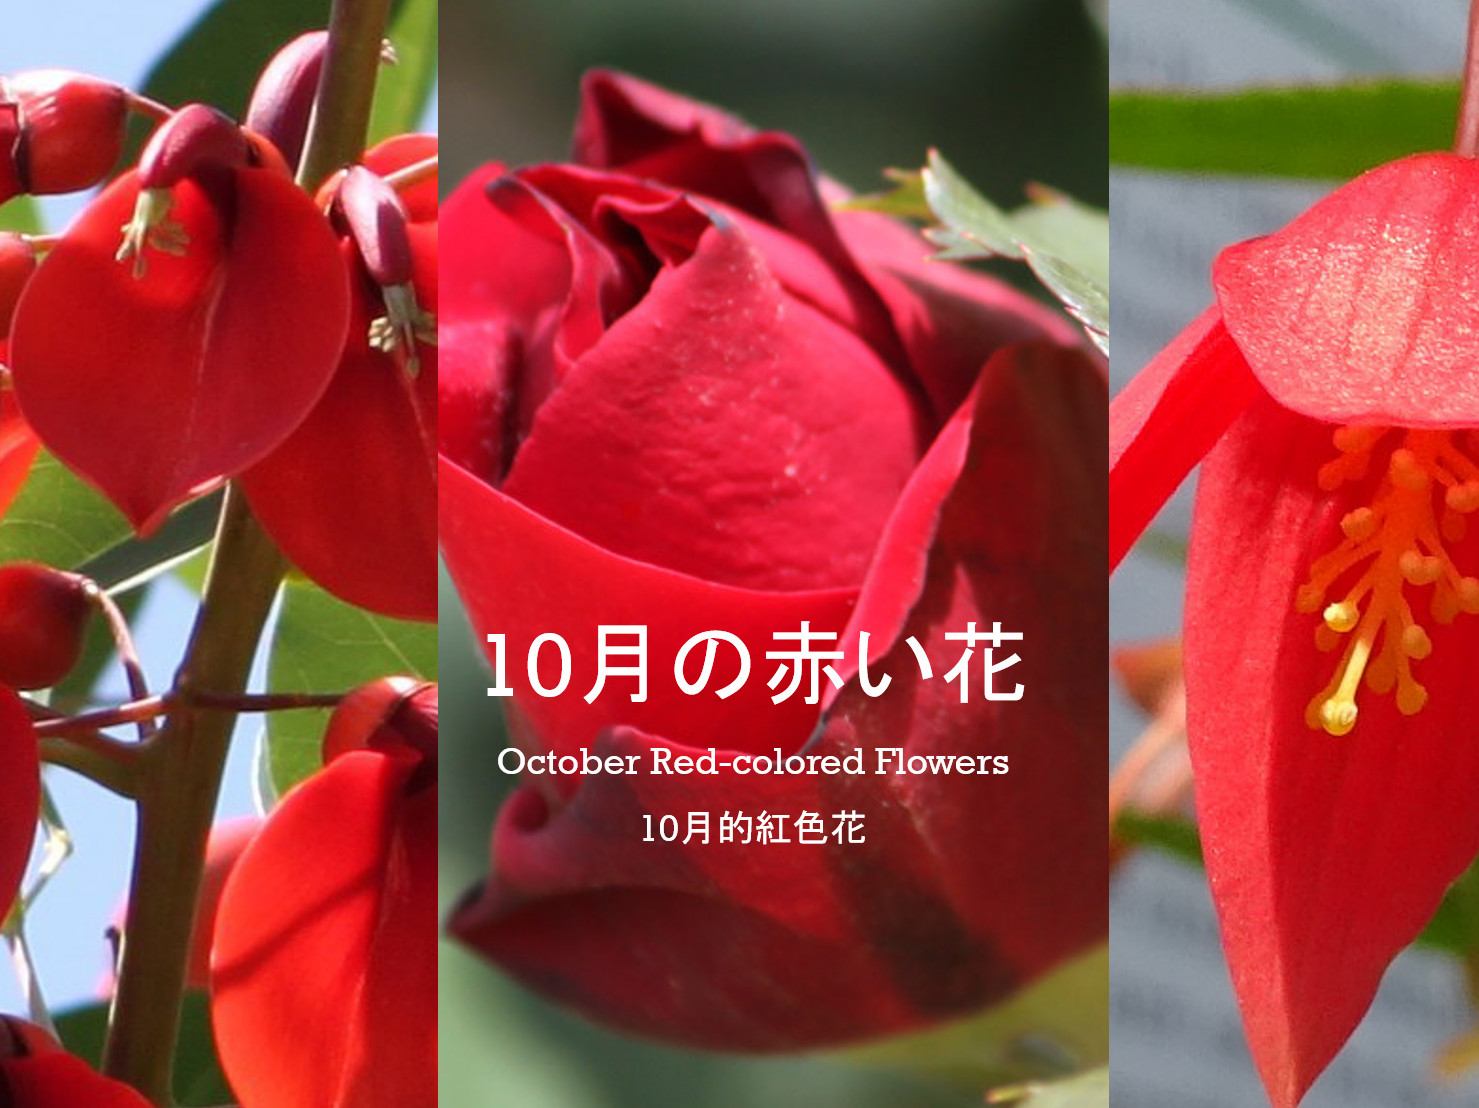 Red-colored flower of October